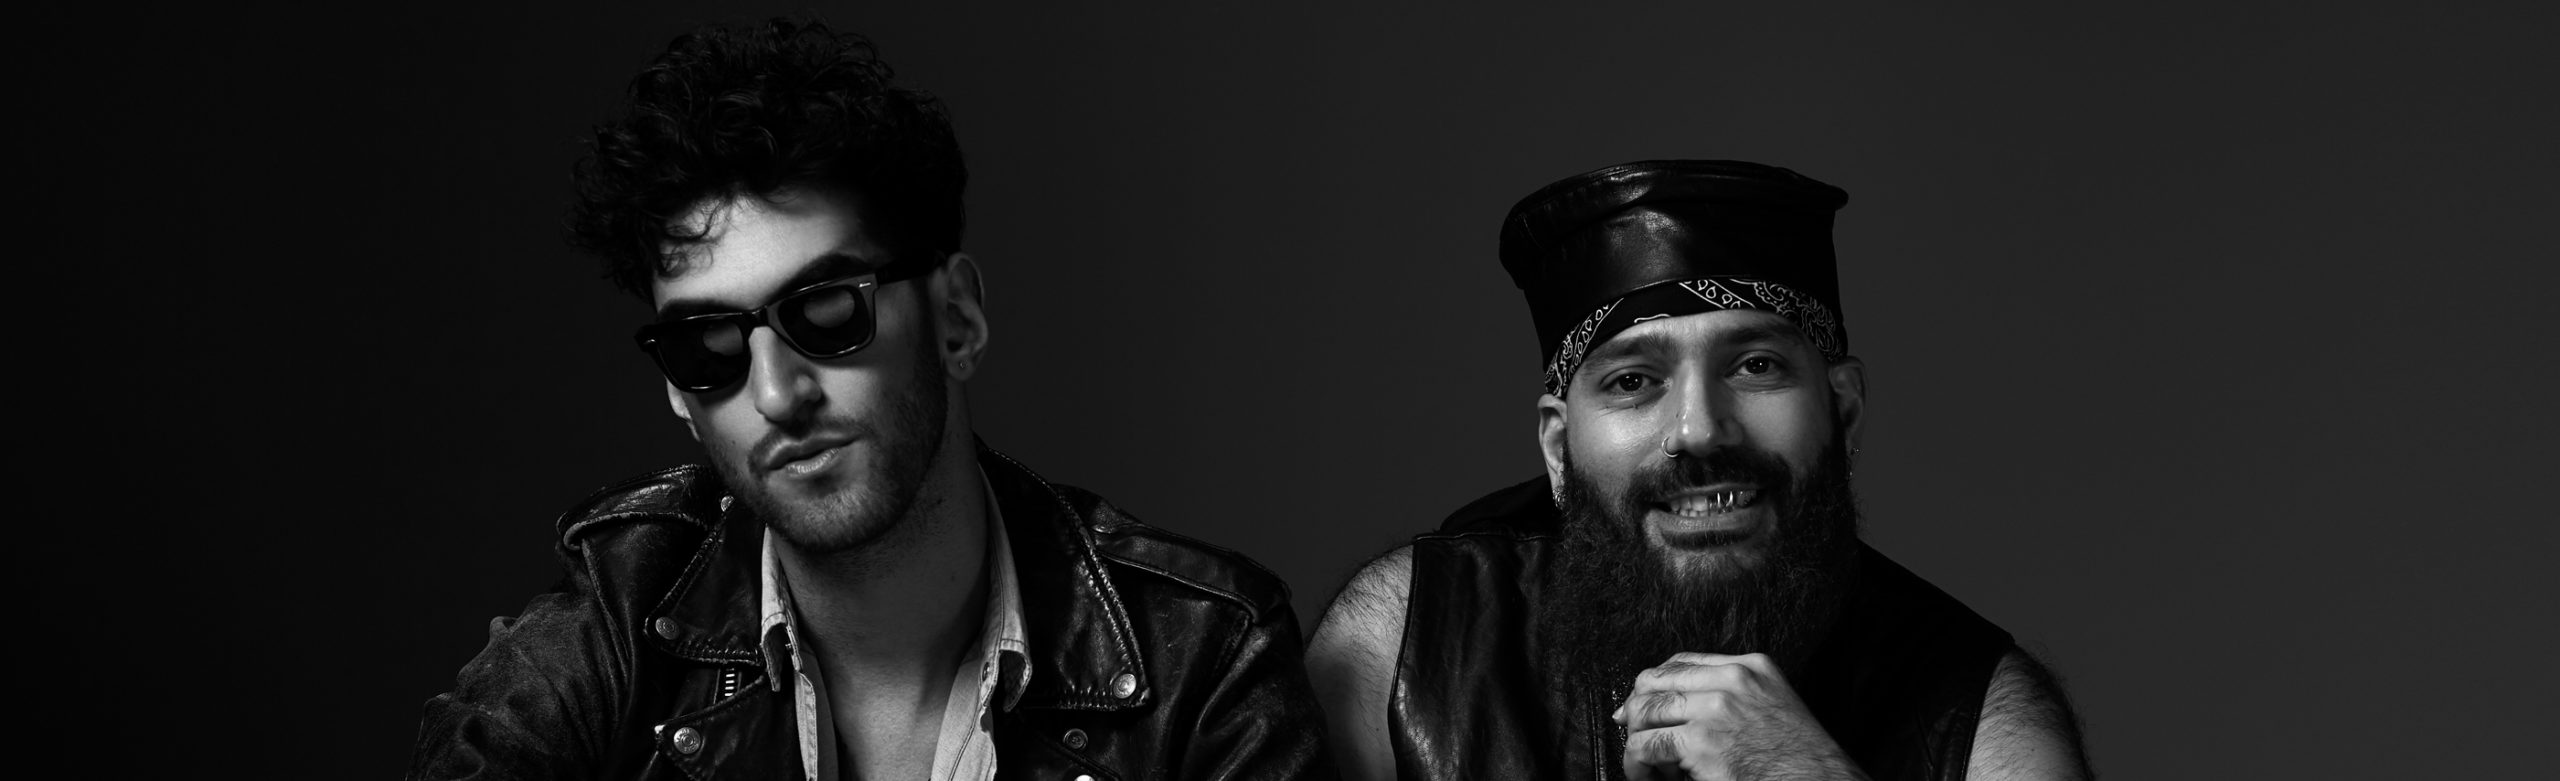 Chromeo Merch & Ticket Giveaway Image